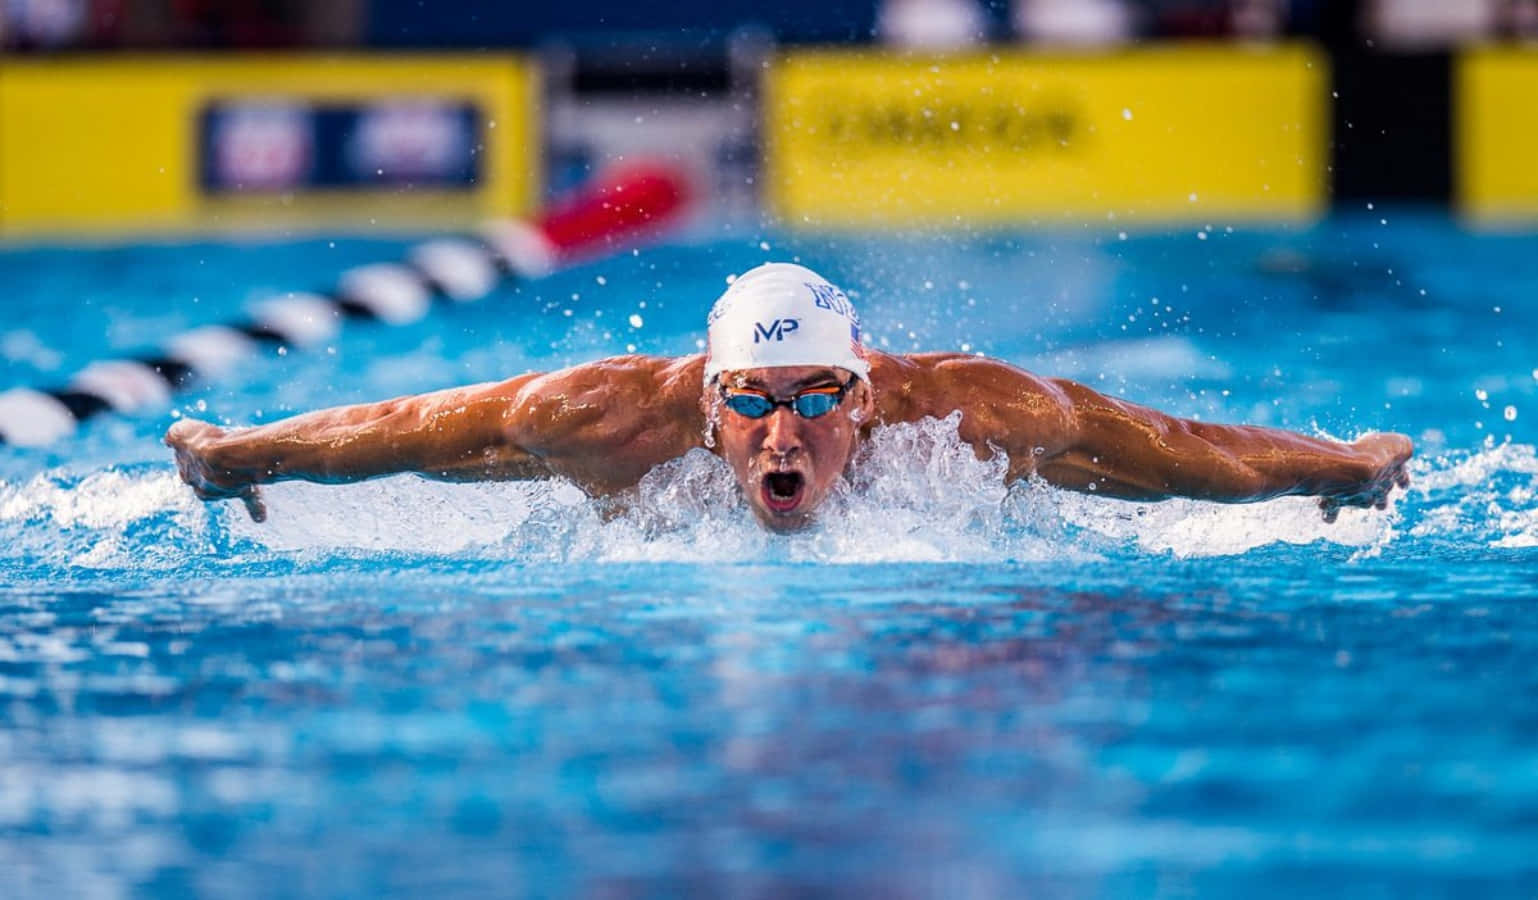 A Swimmer In The Water During A Competition